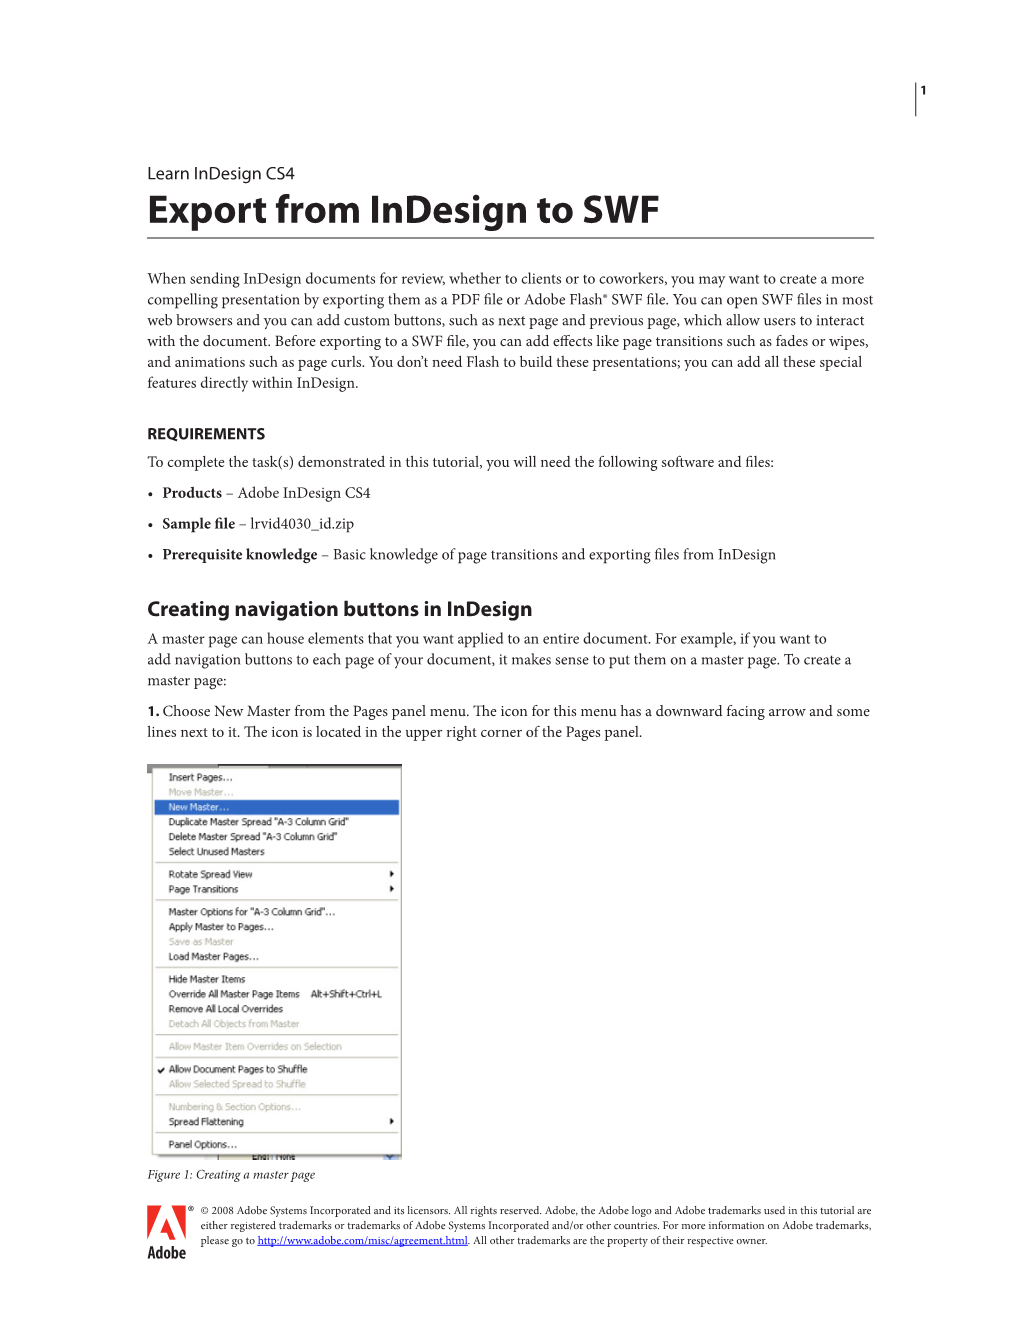 Export from Indesign to SWF